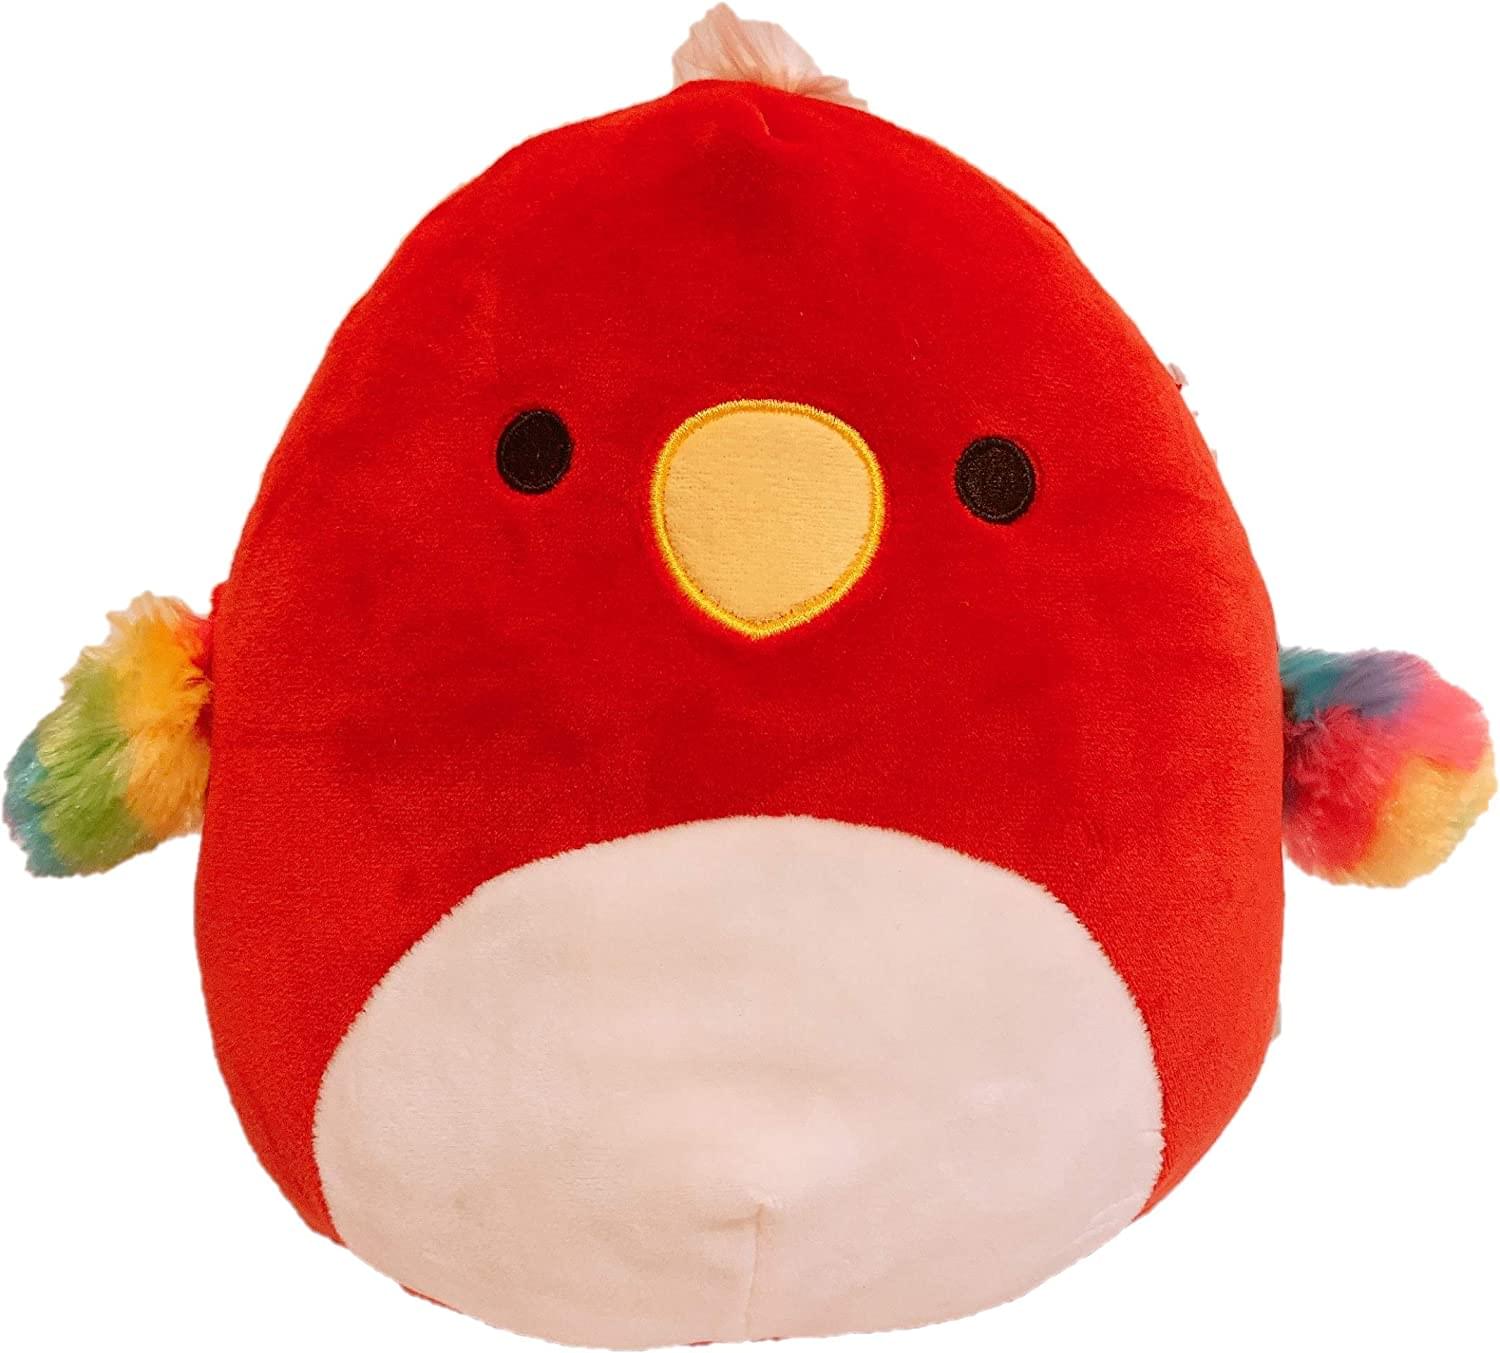 Squishmallow 12 Inch Plush | Paco the Red Parrot